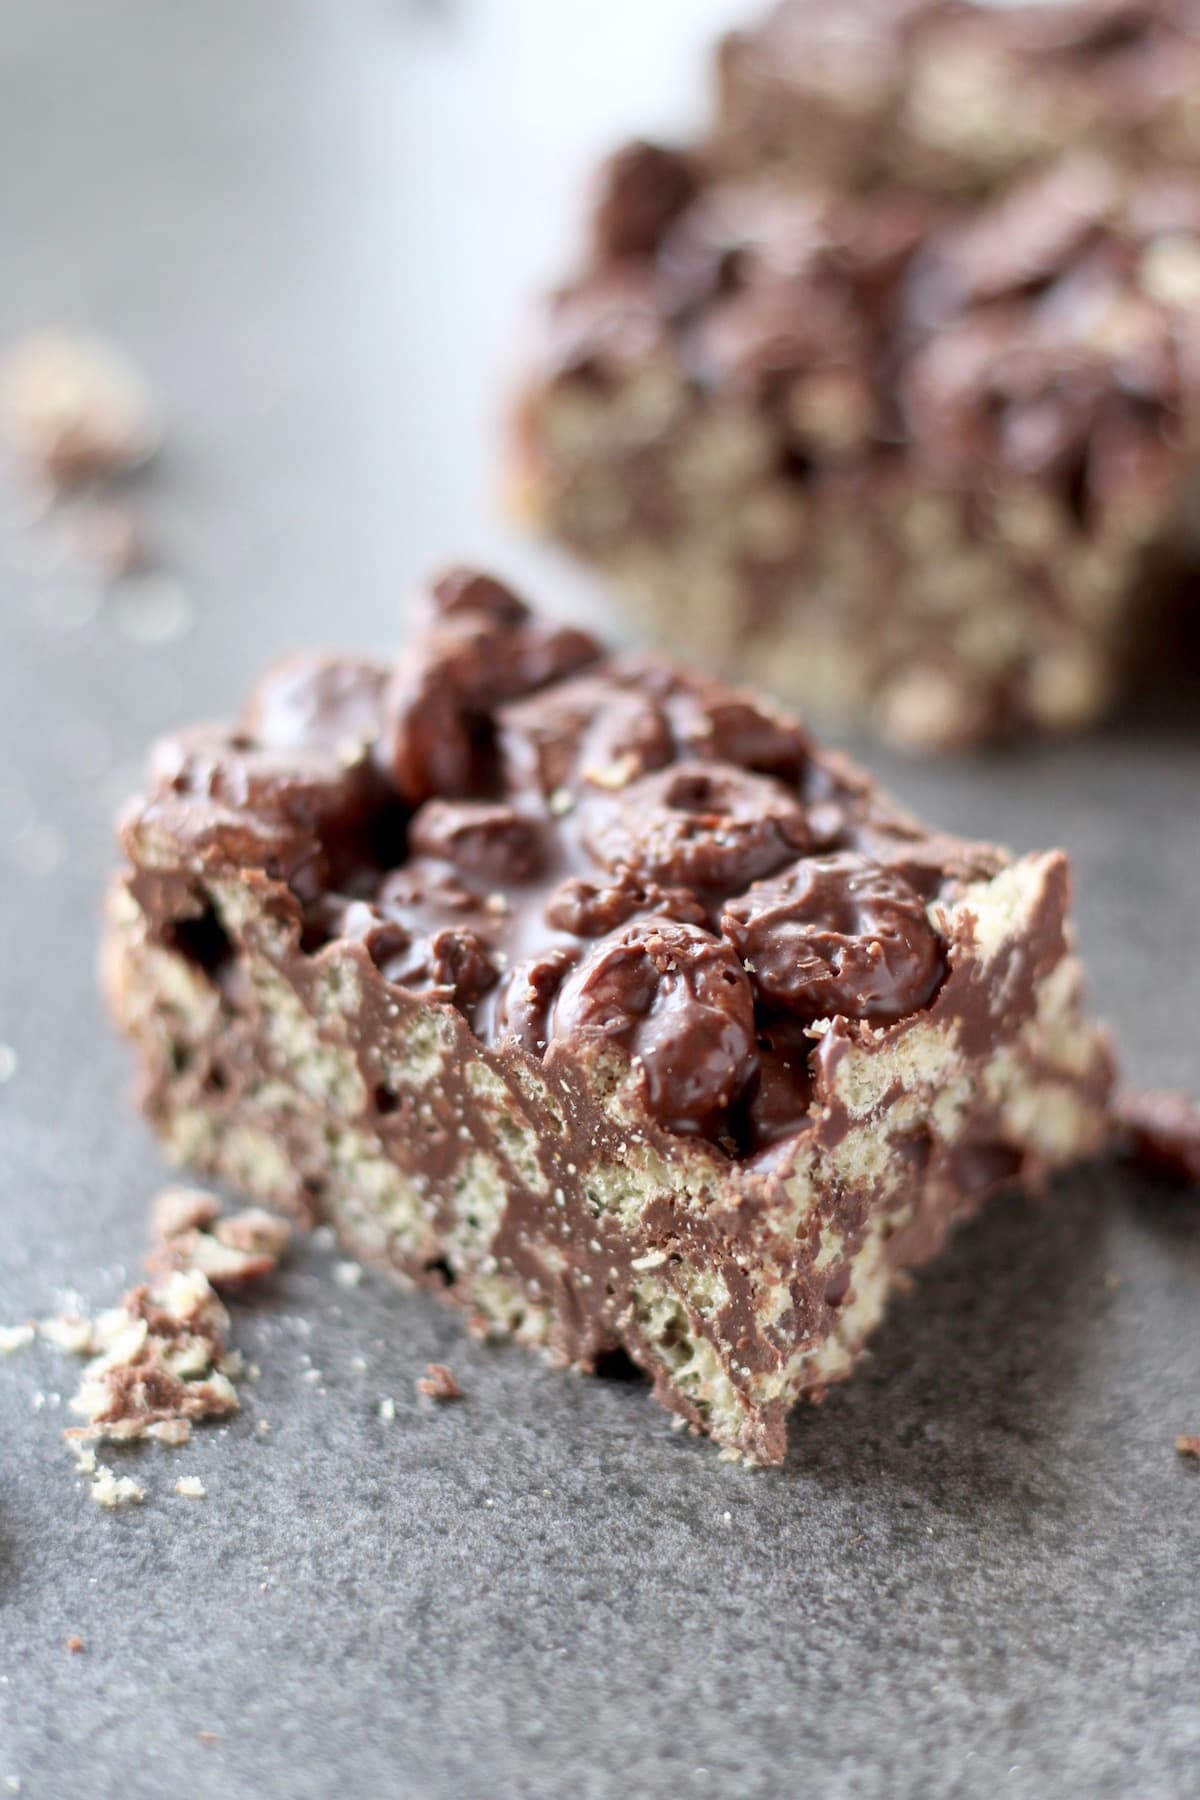 chocolate coated cereal crunch bars